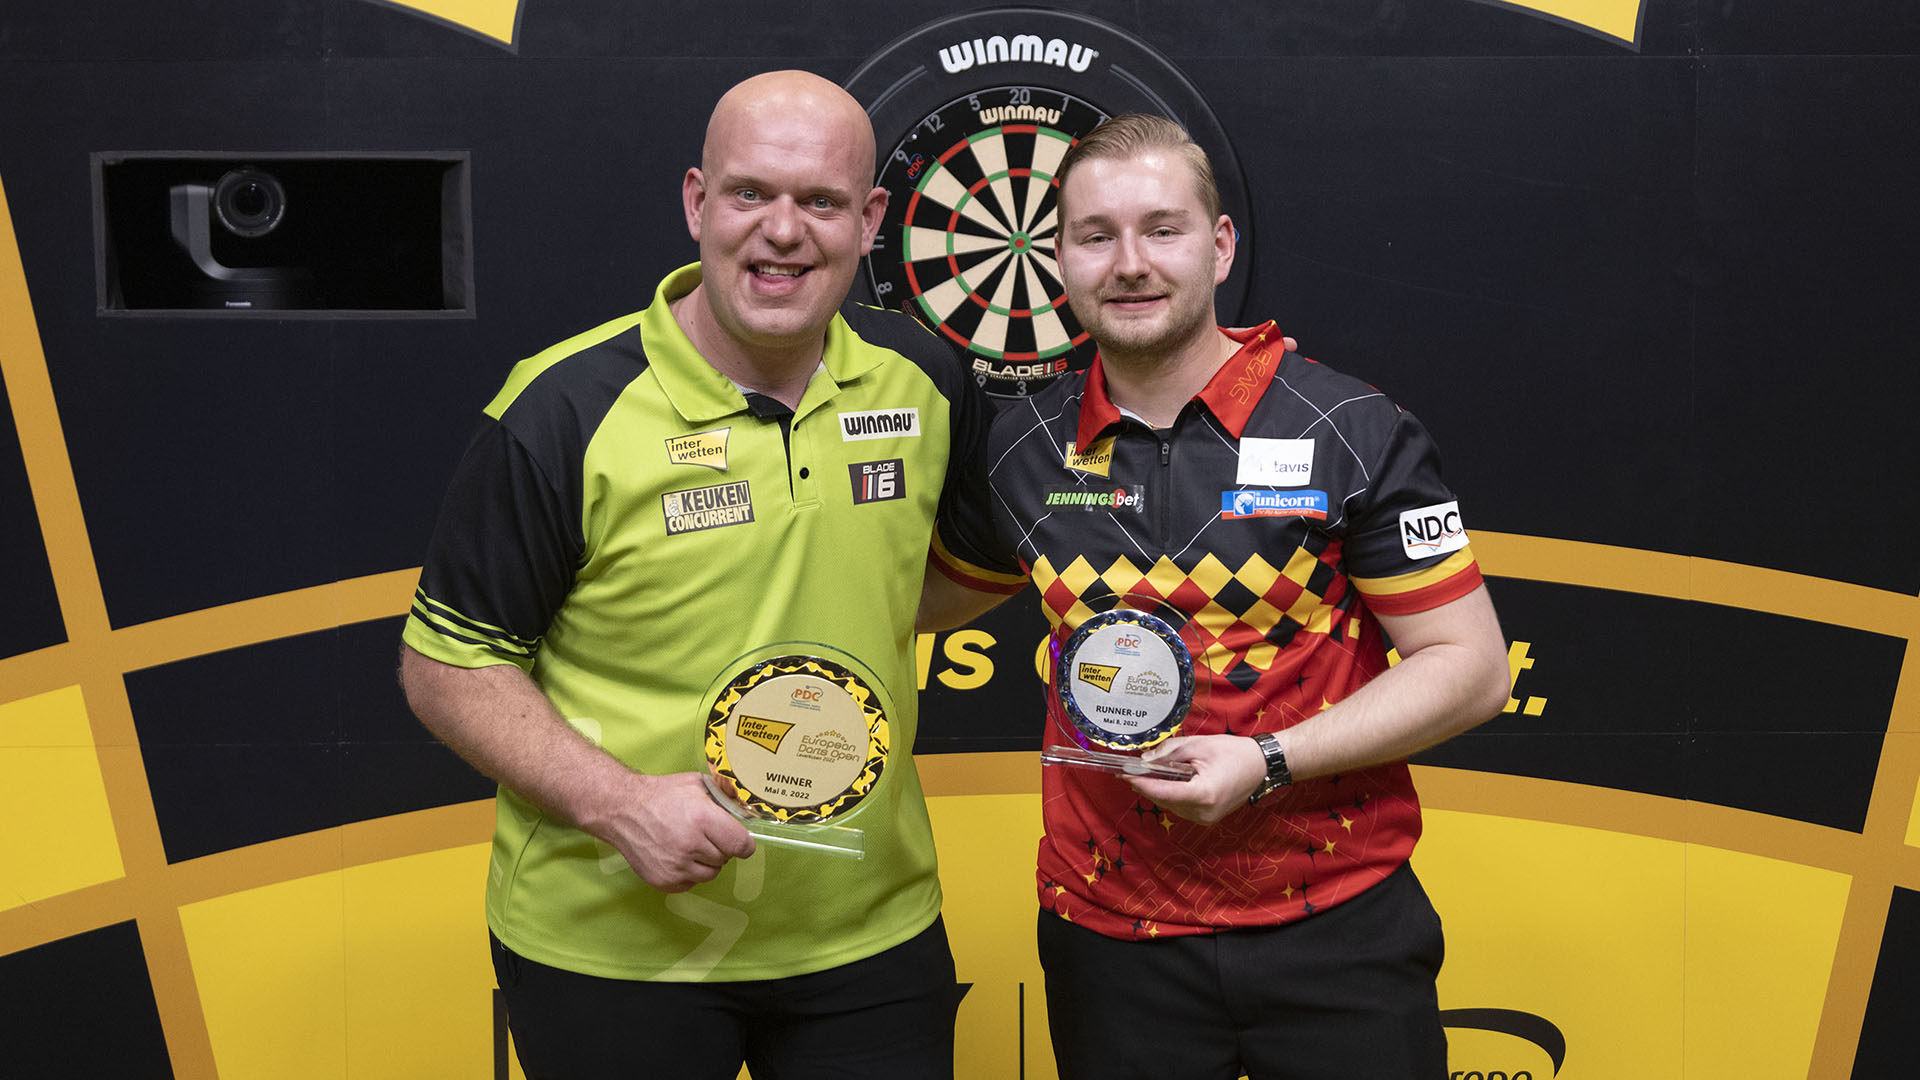 European Darts Open 2022: Draw, schedule, results, odds & TV coverage